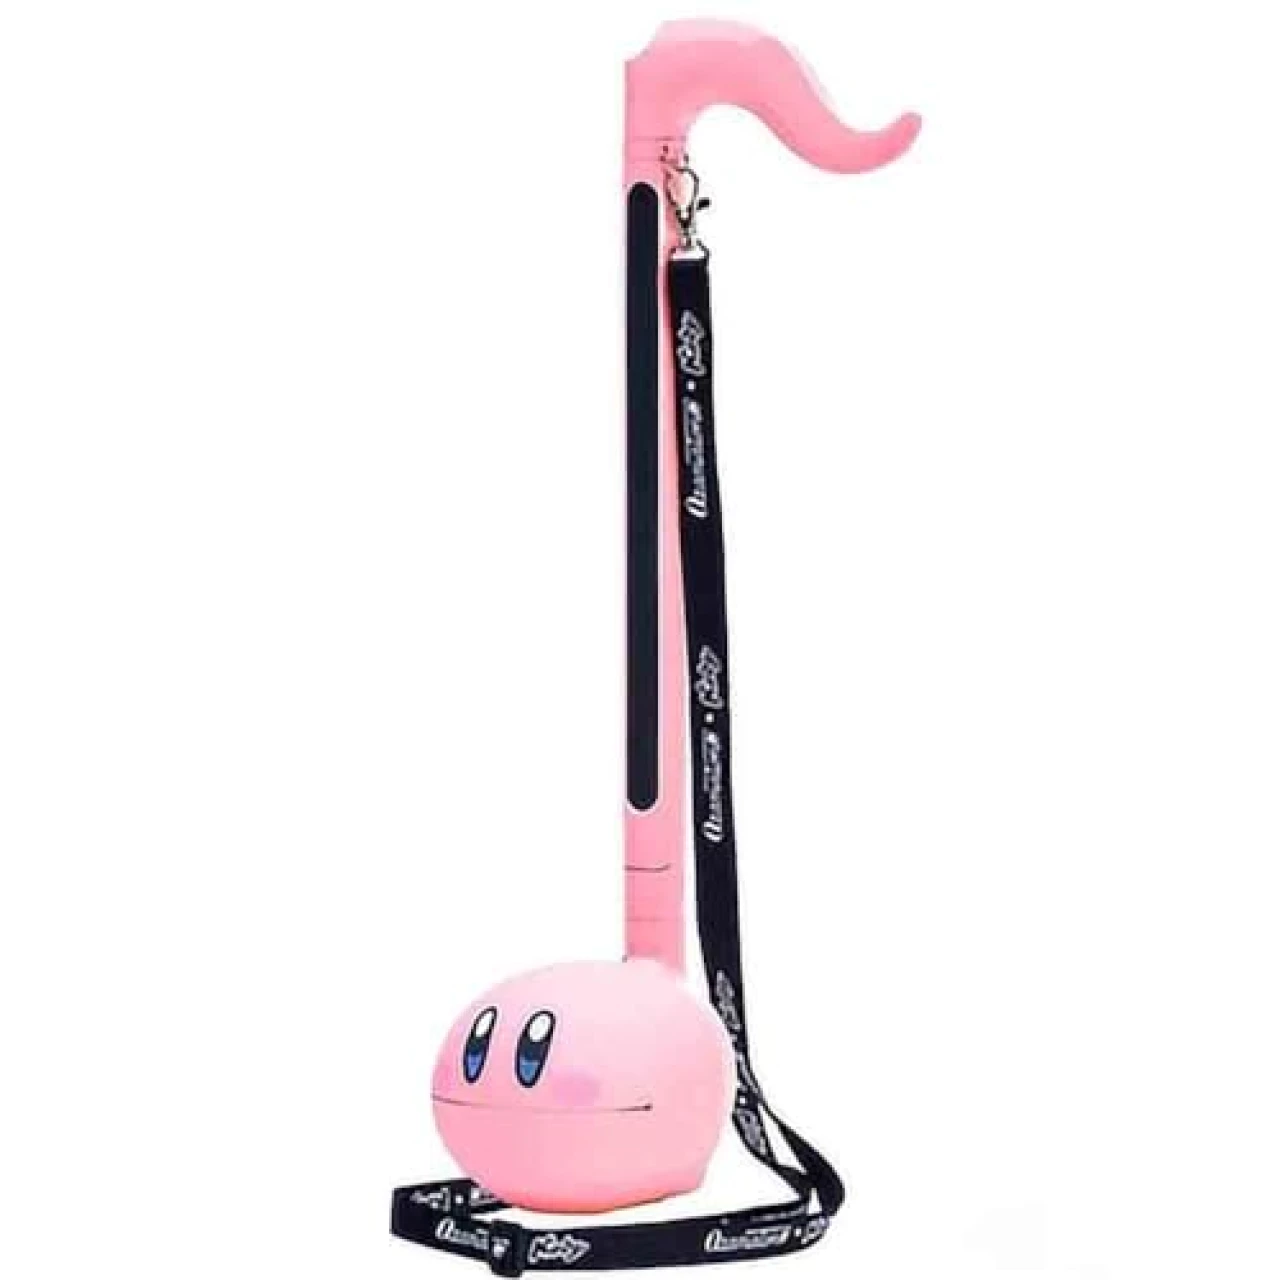 Otamatone &ldquo;Deluxe [Kirby Edition] Electronic Musical Instrument Portable Synthesizer from Japan by Cube/Maywa Denki